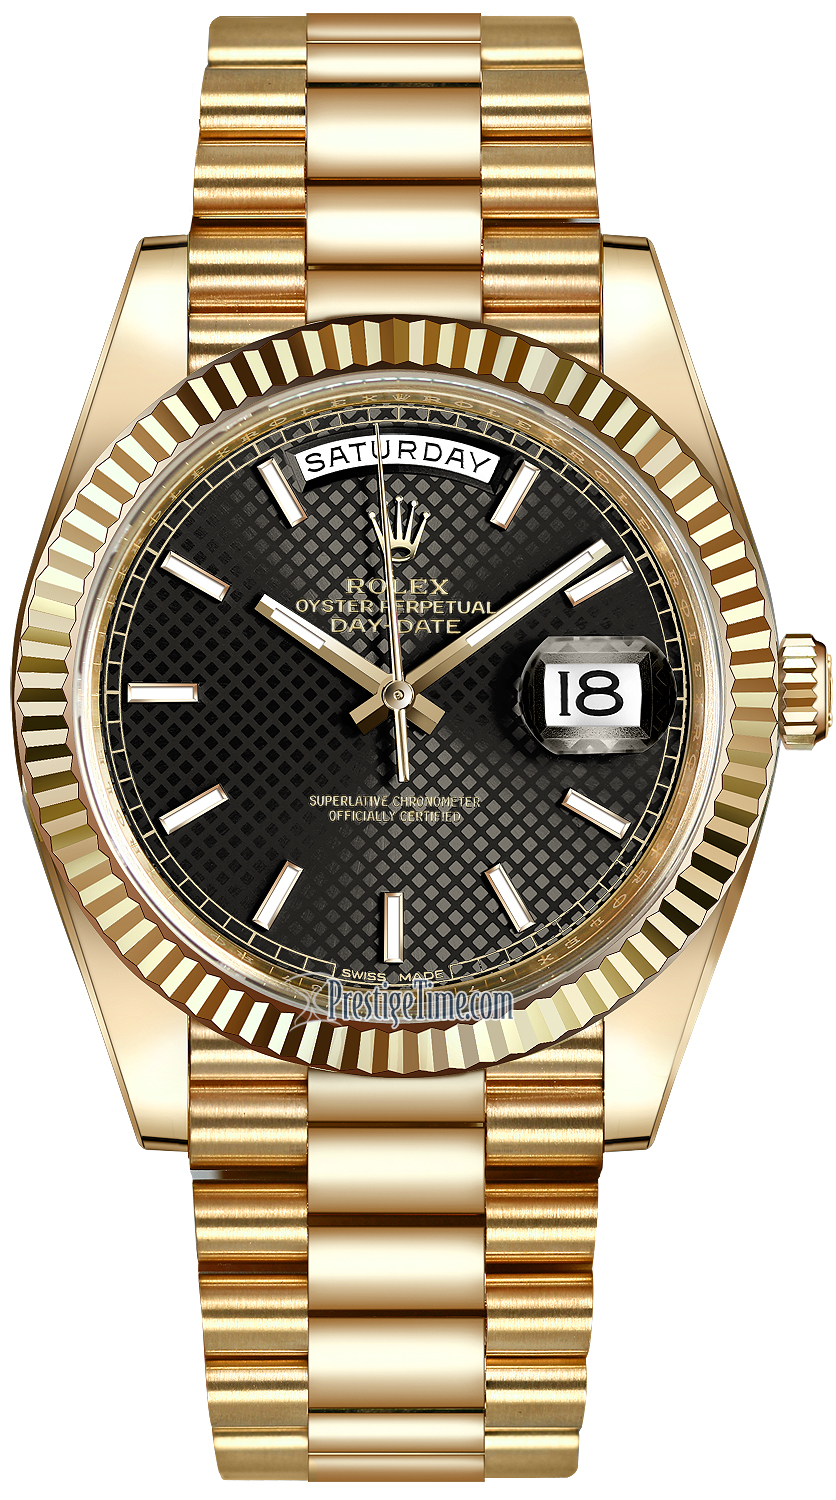 Rolex Day-Date 40mm Yellow Gold Mens Watch